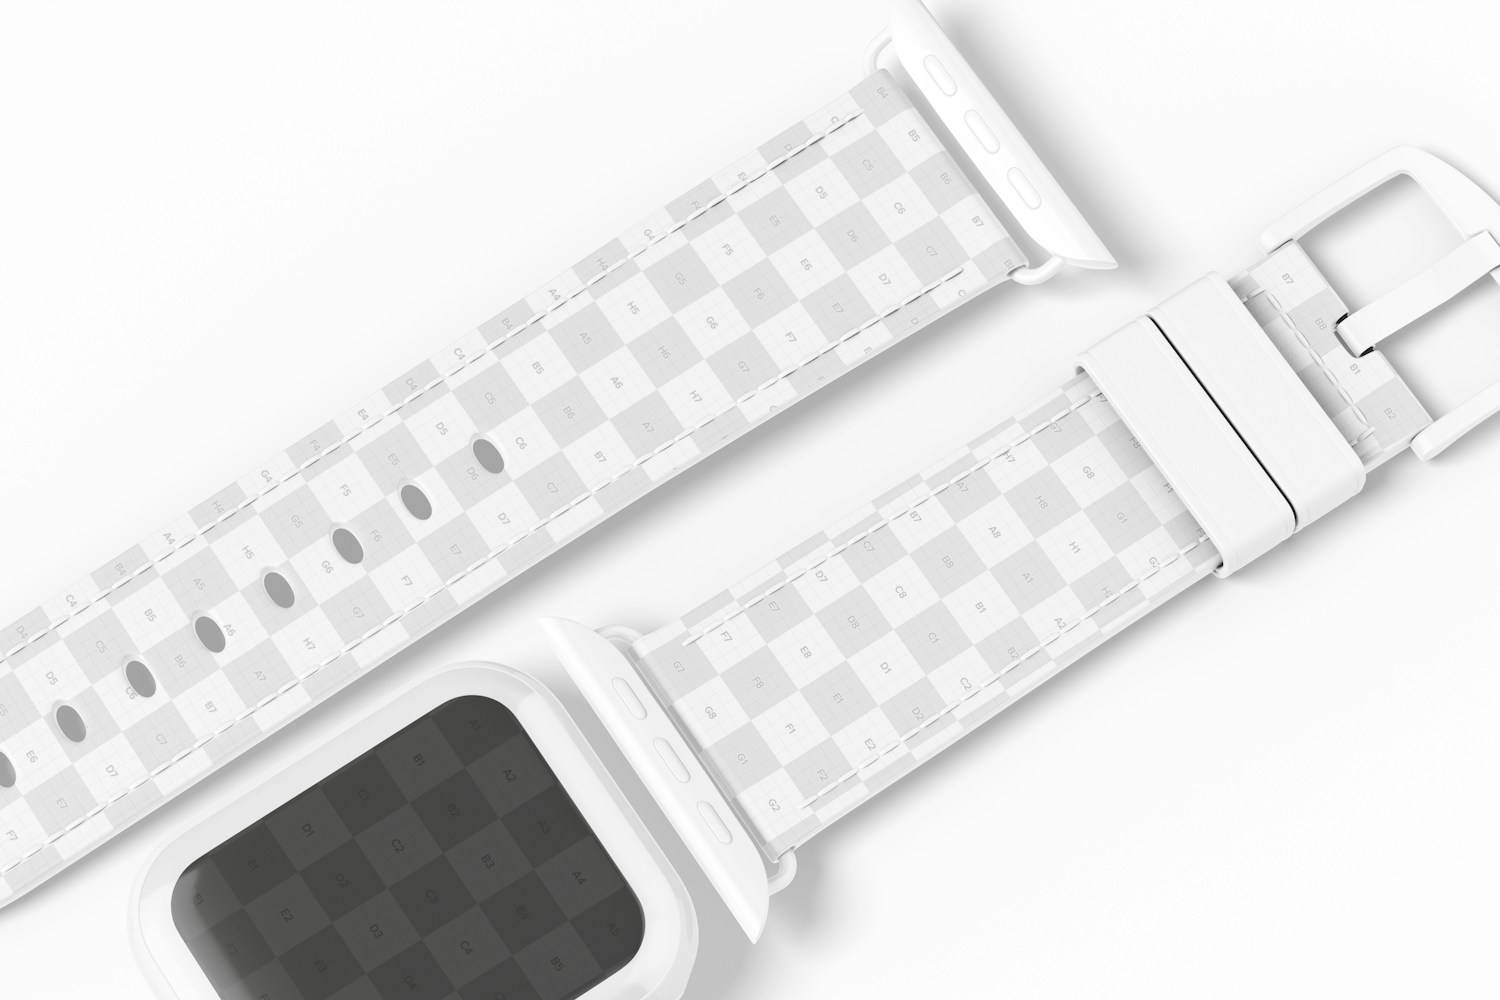 Leather Bands Apple Watch 7 Mockup